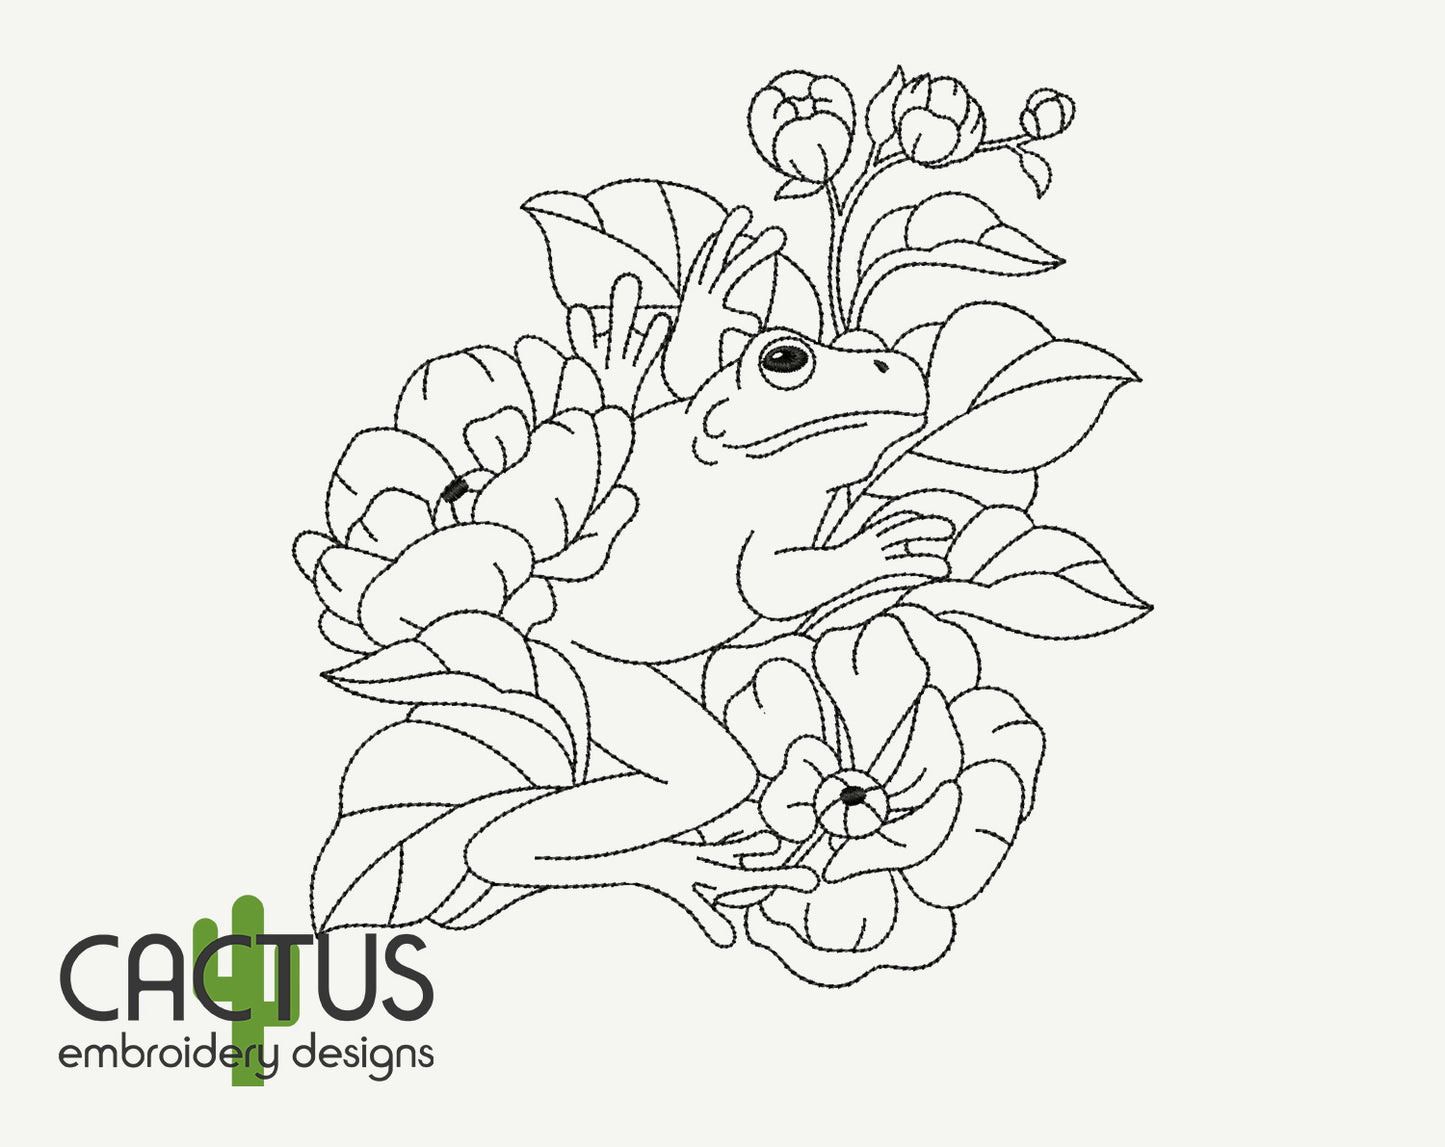 Frog Peonies Embroidery Design